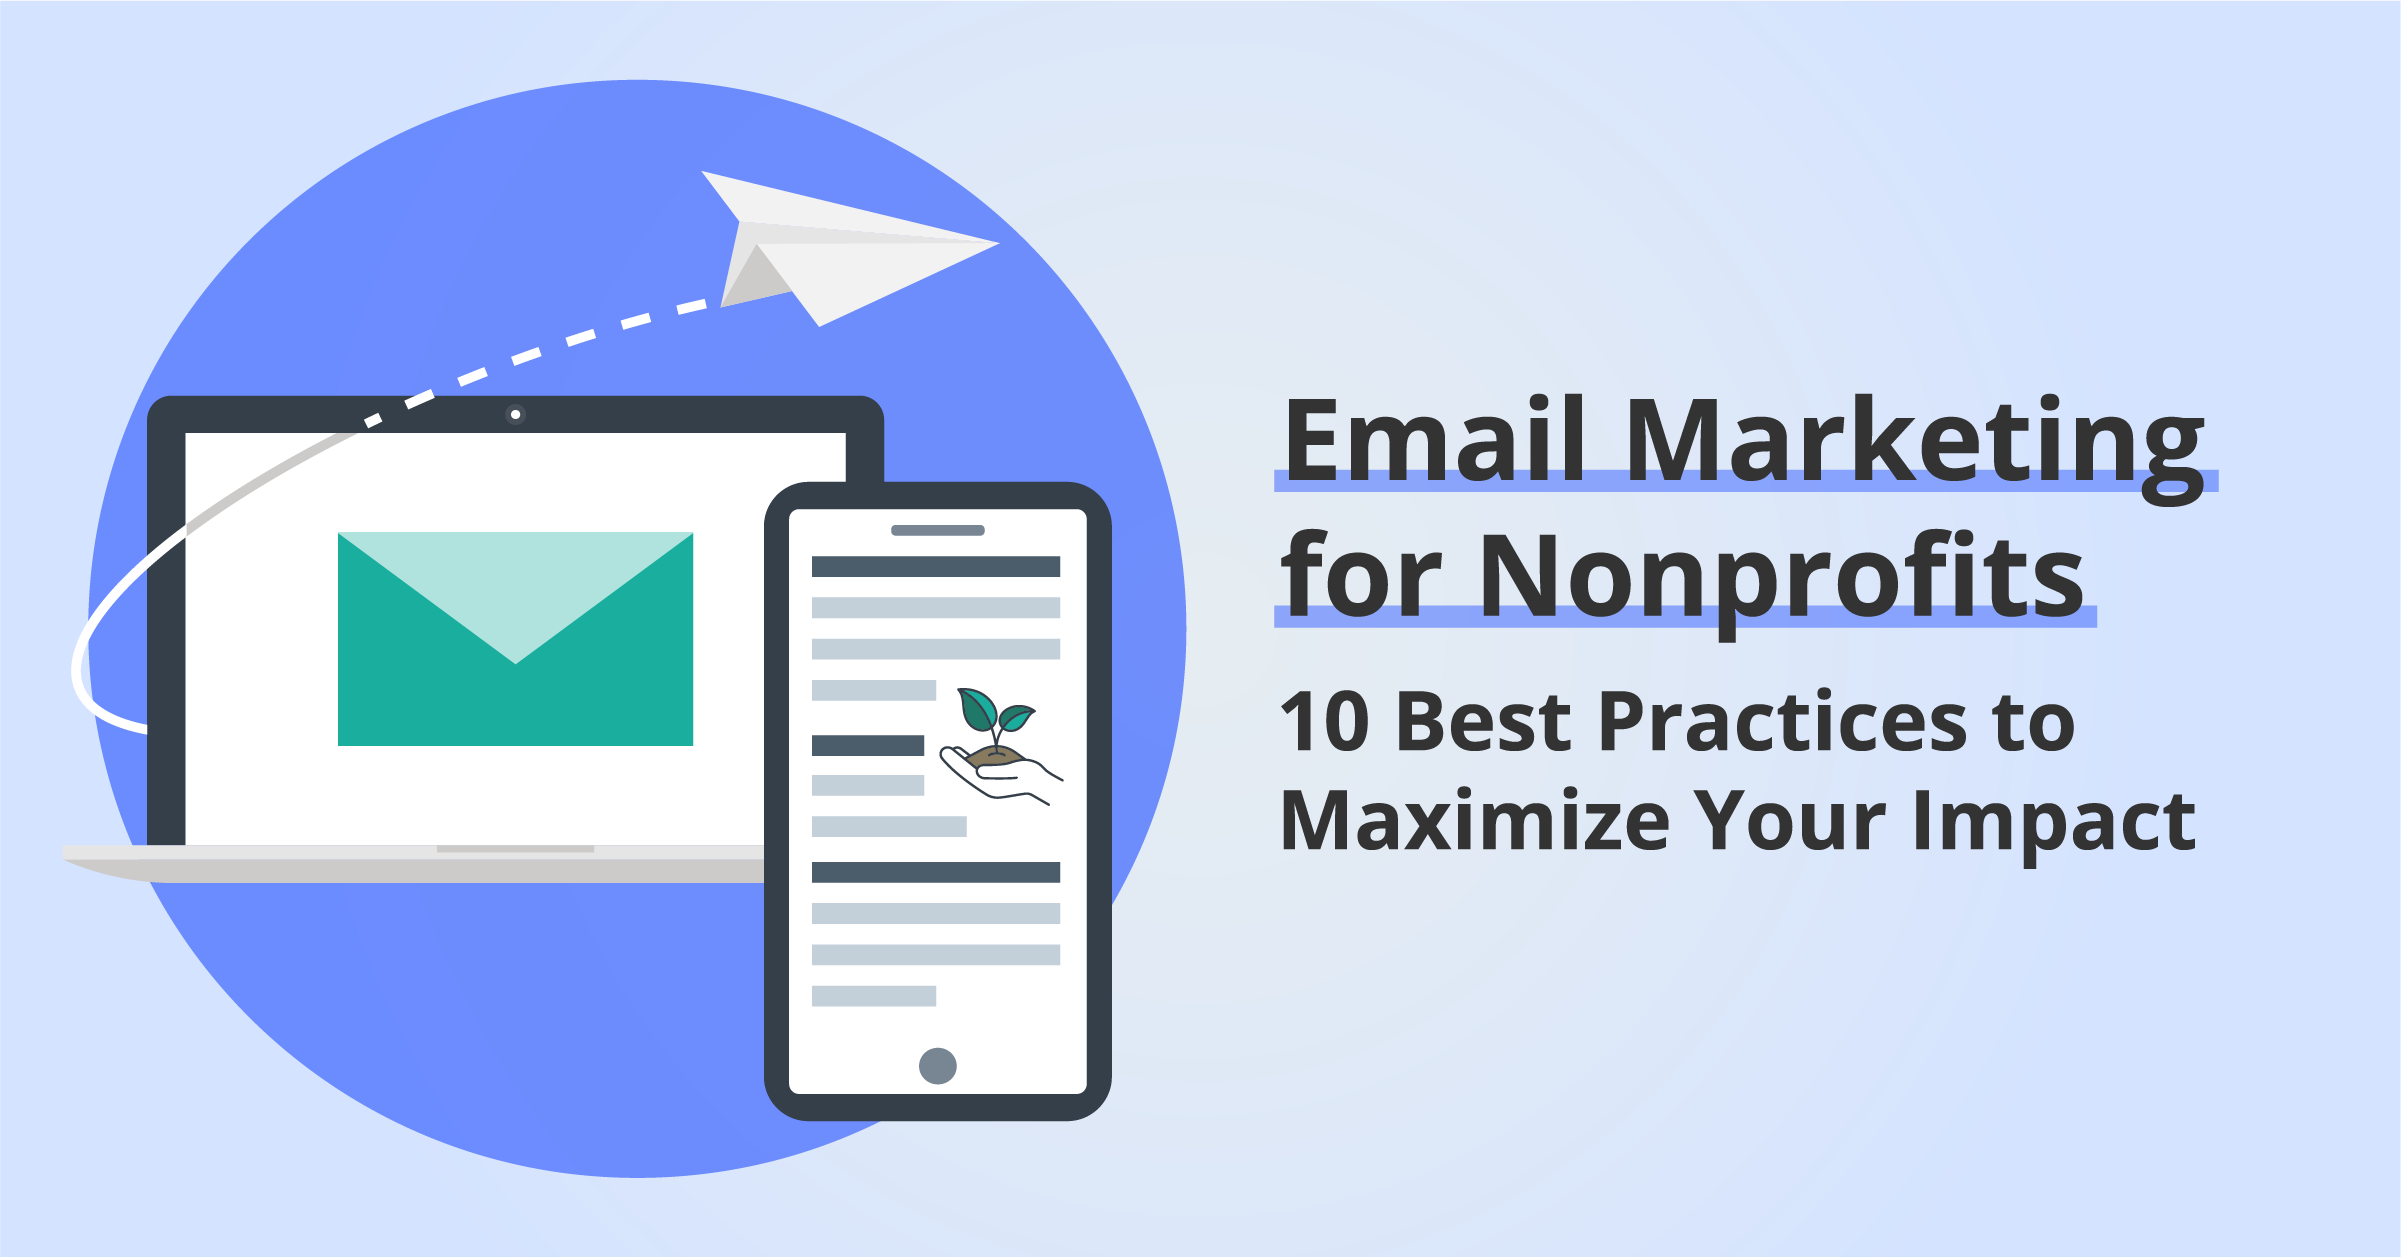 Email Marketing for Nonprofits: 10 Best Practices to Maximize Your Impact